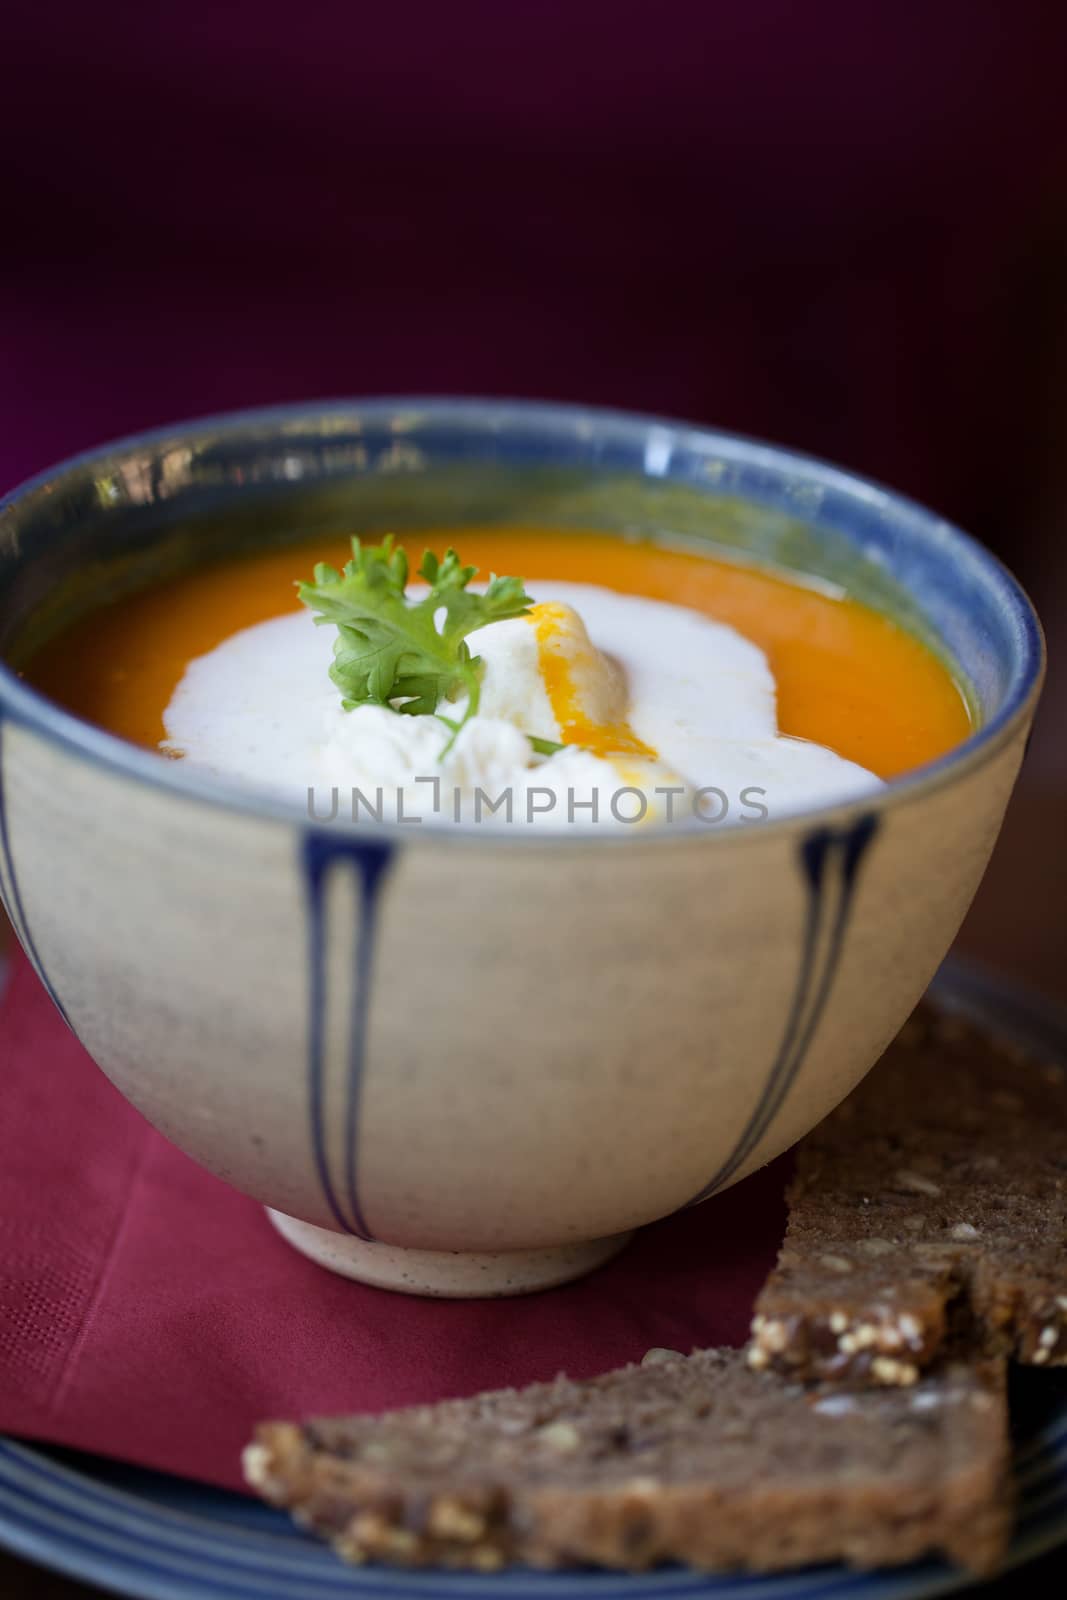 Small bowl filled with tasty carrot soup with slices of brown bread